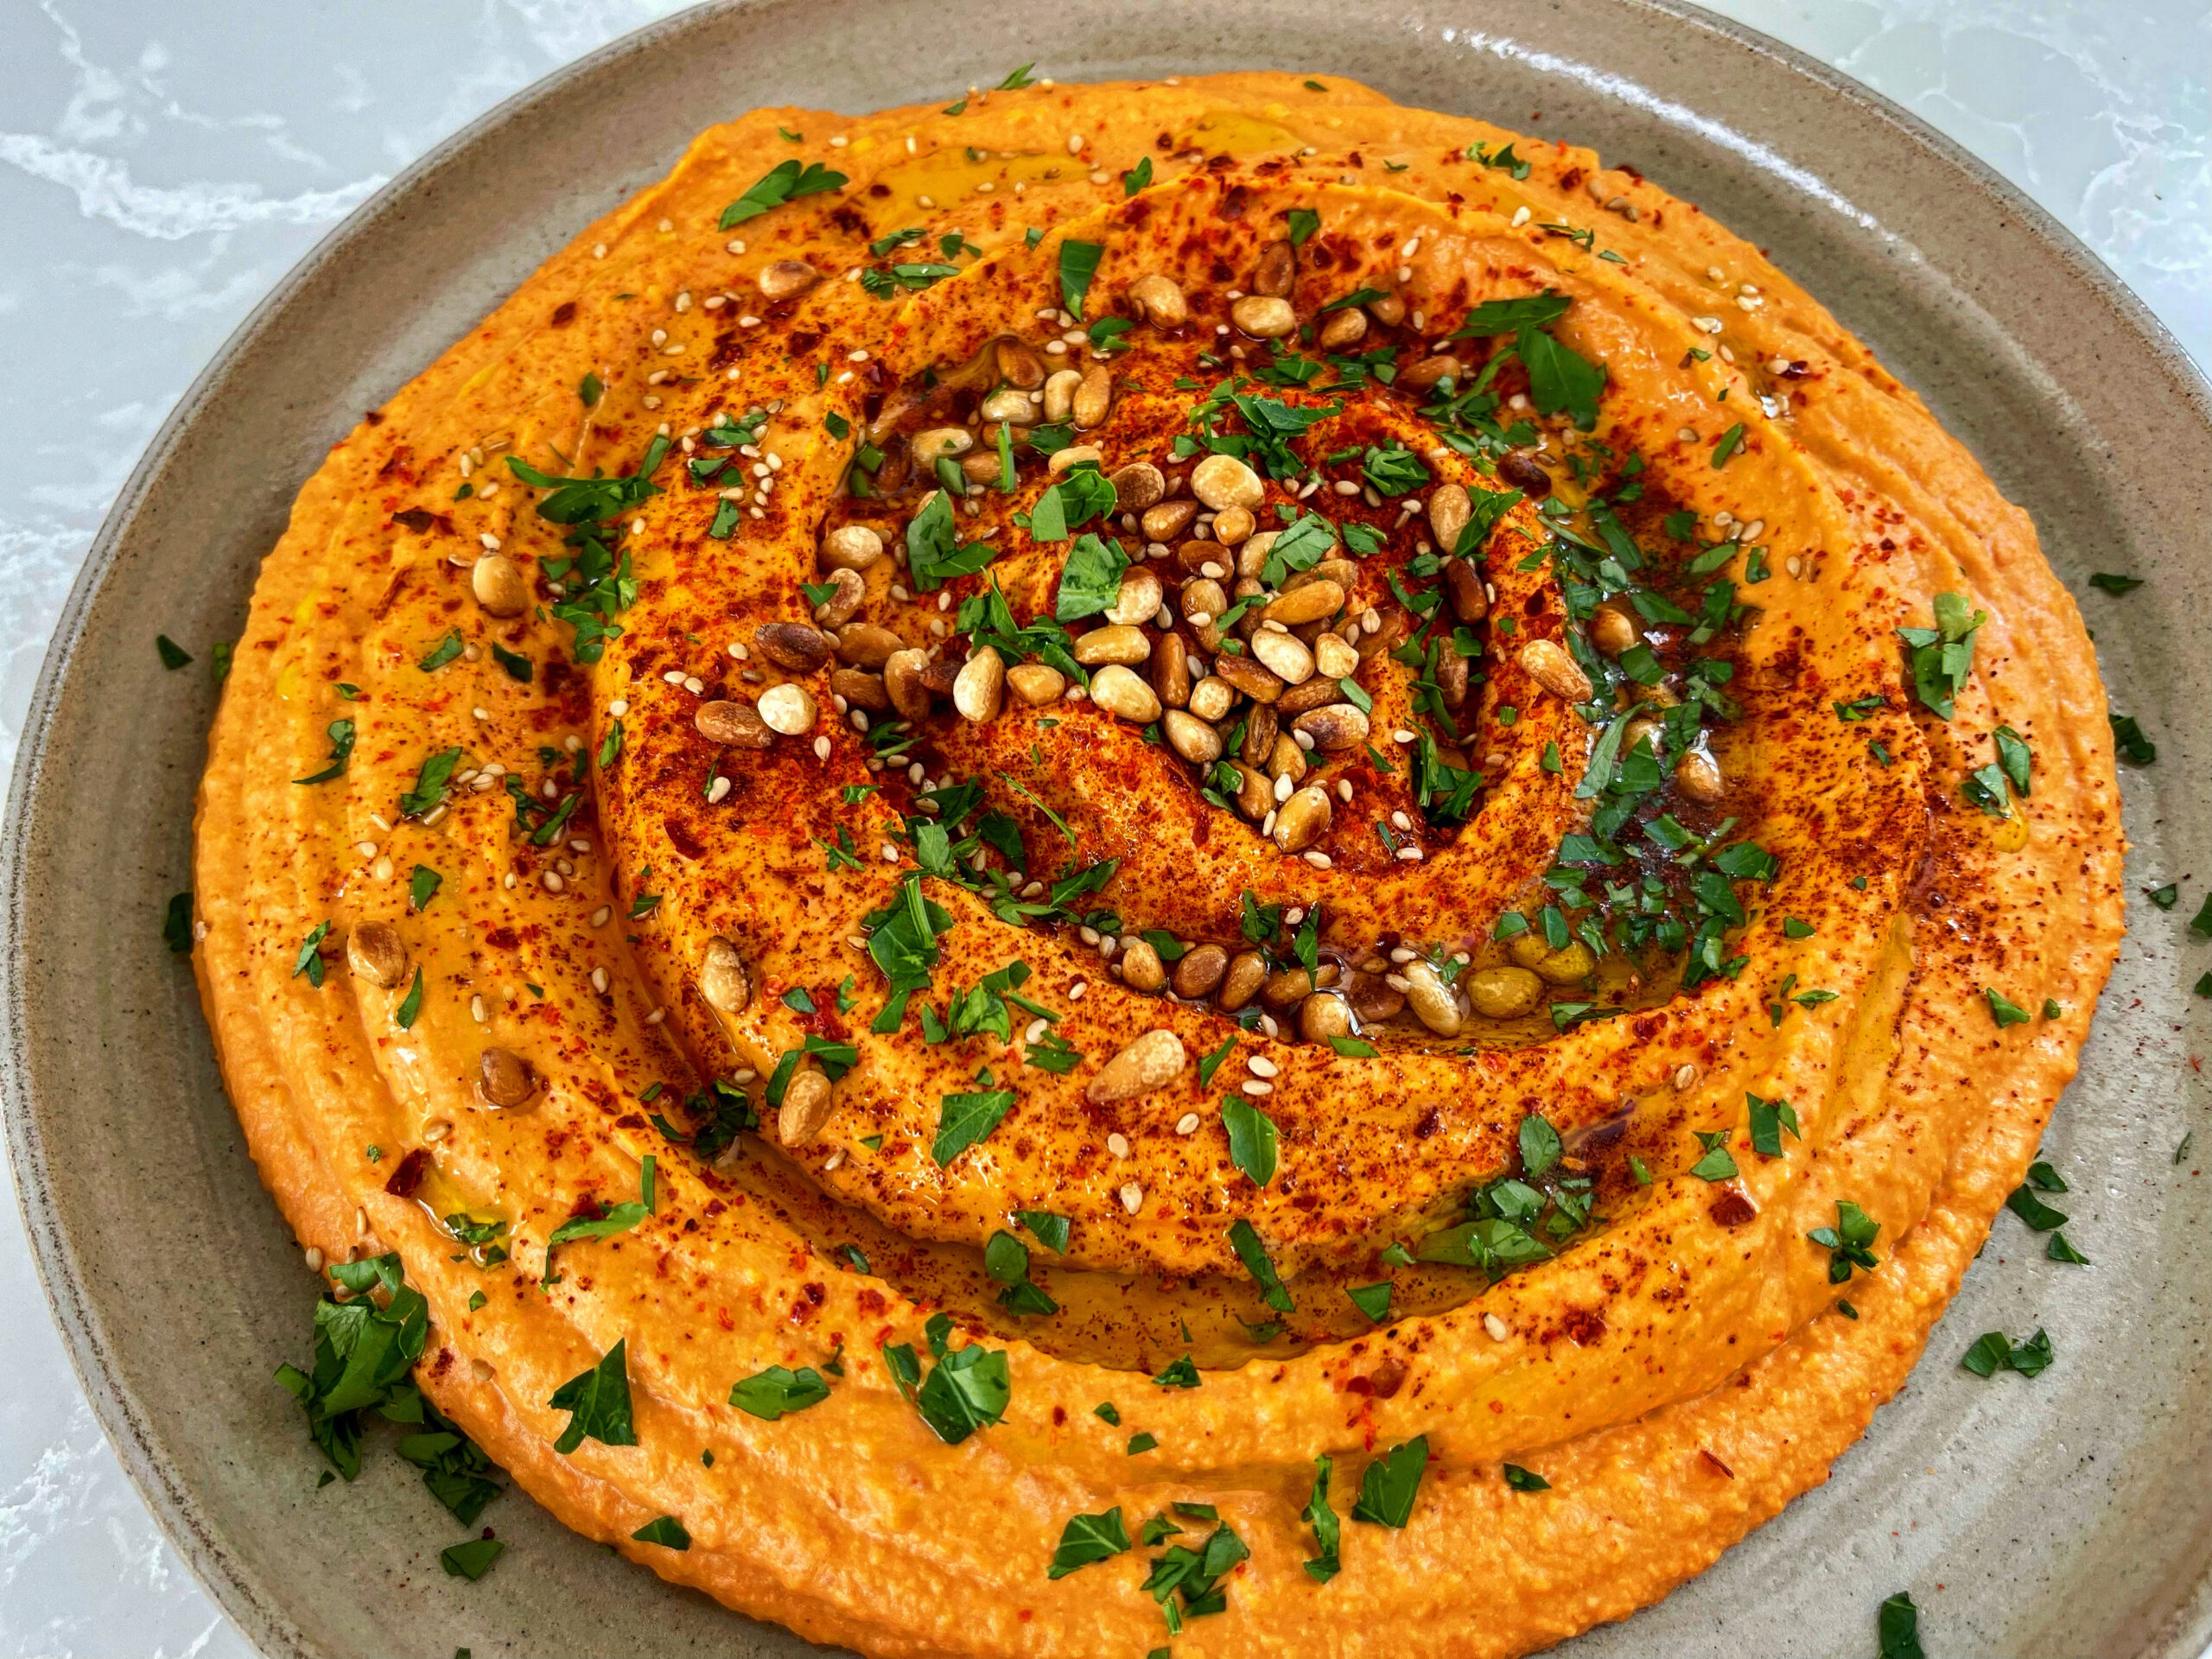 Meliz Cooks Smoky Roasted Garlic and Red Pepper Hummus